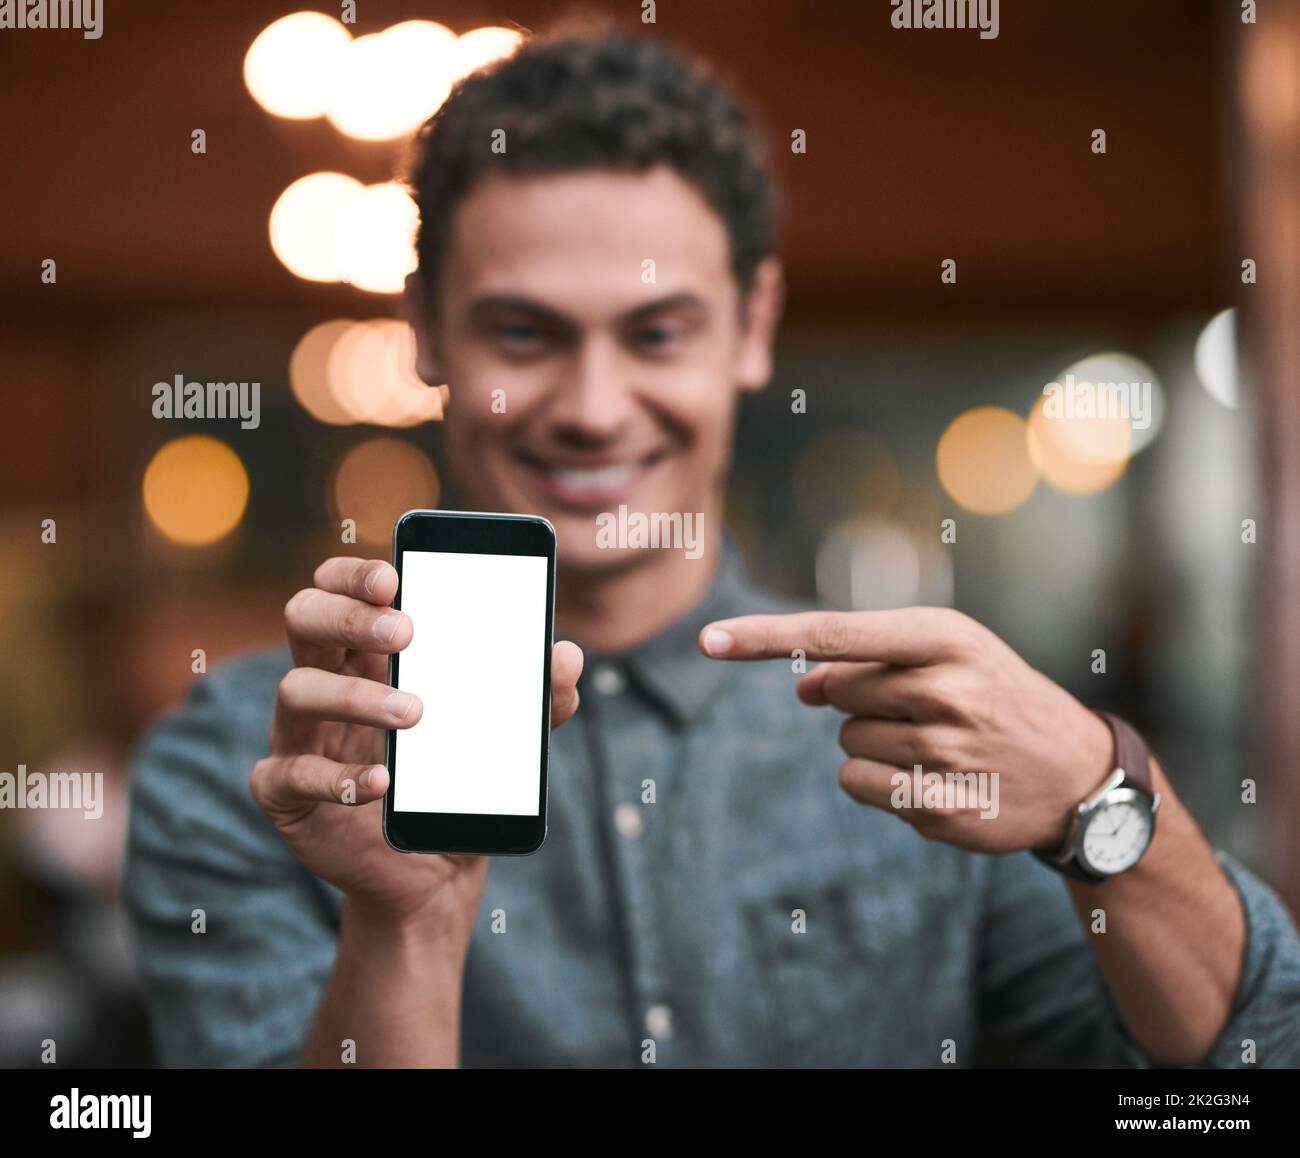 Looks like were getting popular. Shot of a confident young man holding up a cellphone to the camera while standing inside of a beer brewery during the day. Stock Photo